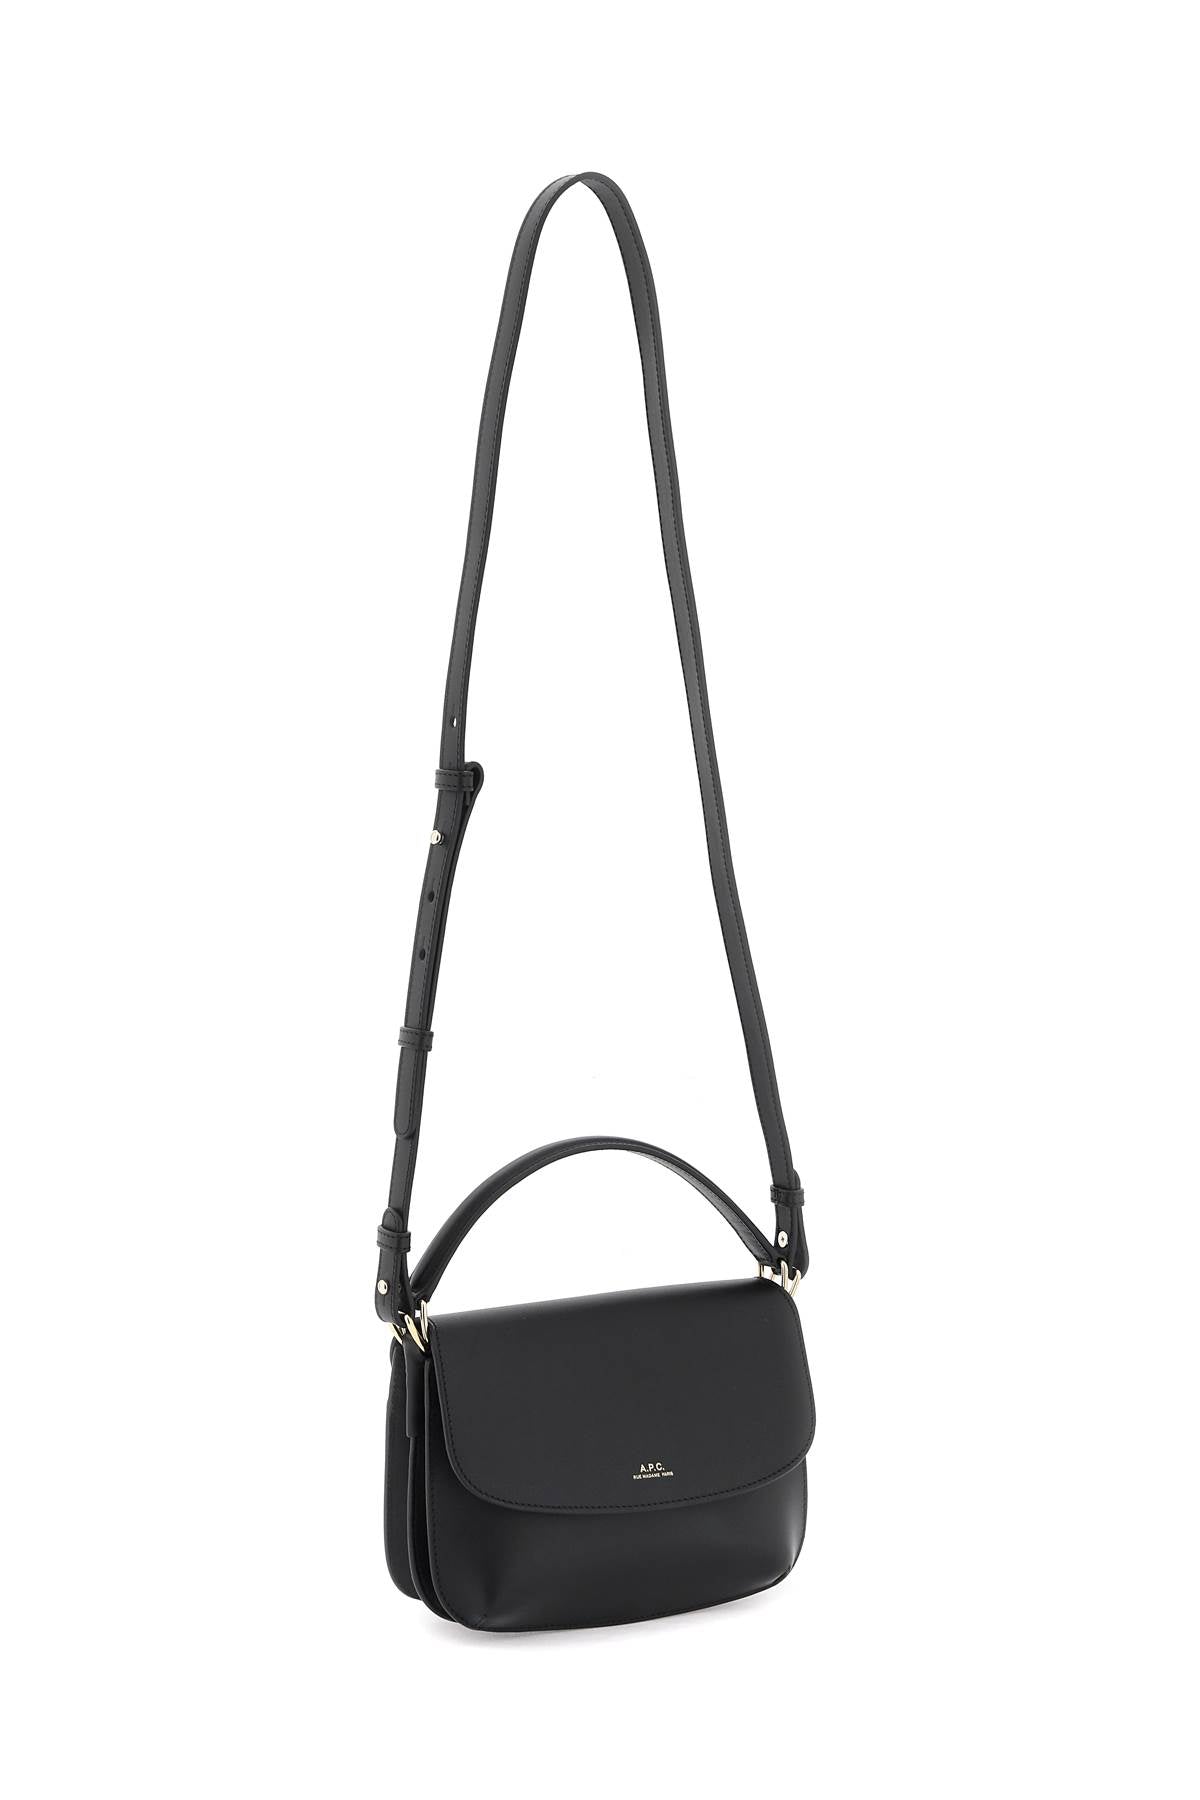 A.P.C. Sarah Mini Black Leather Shoulder Bag with Gold Accents and Detachable Strap